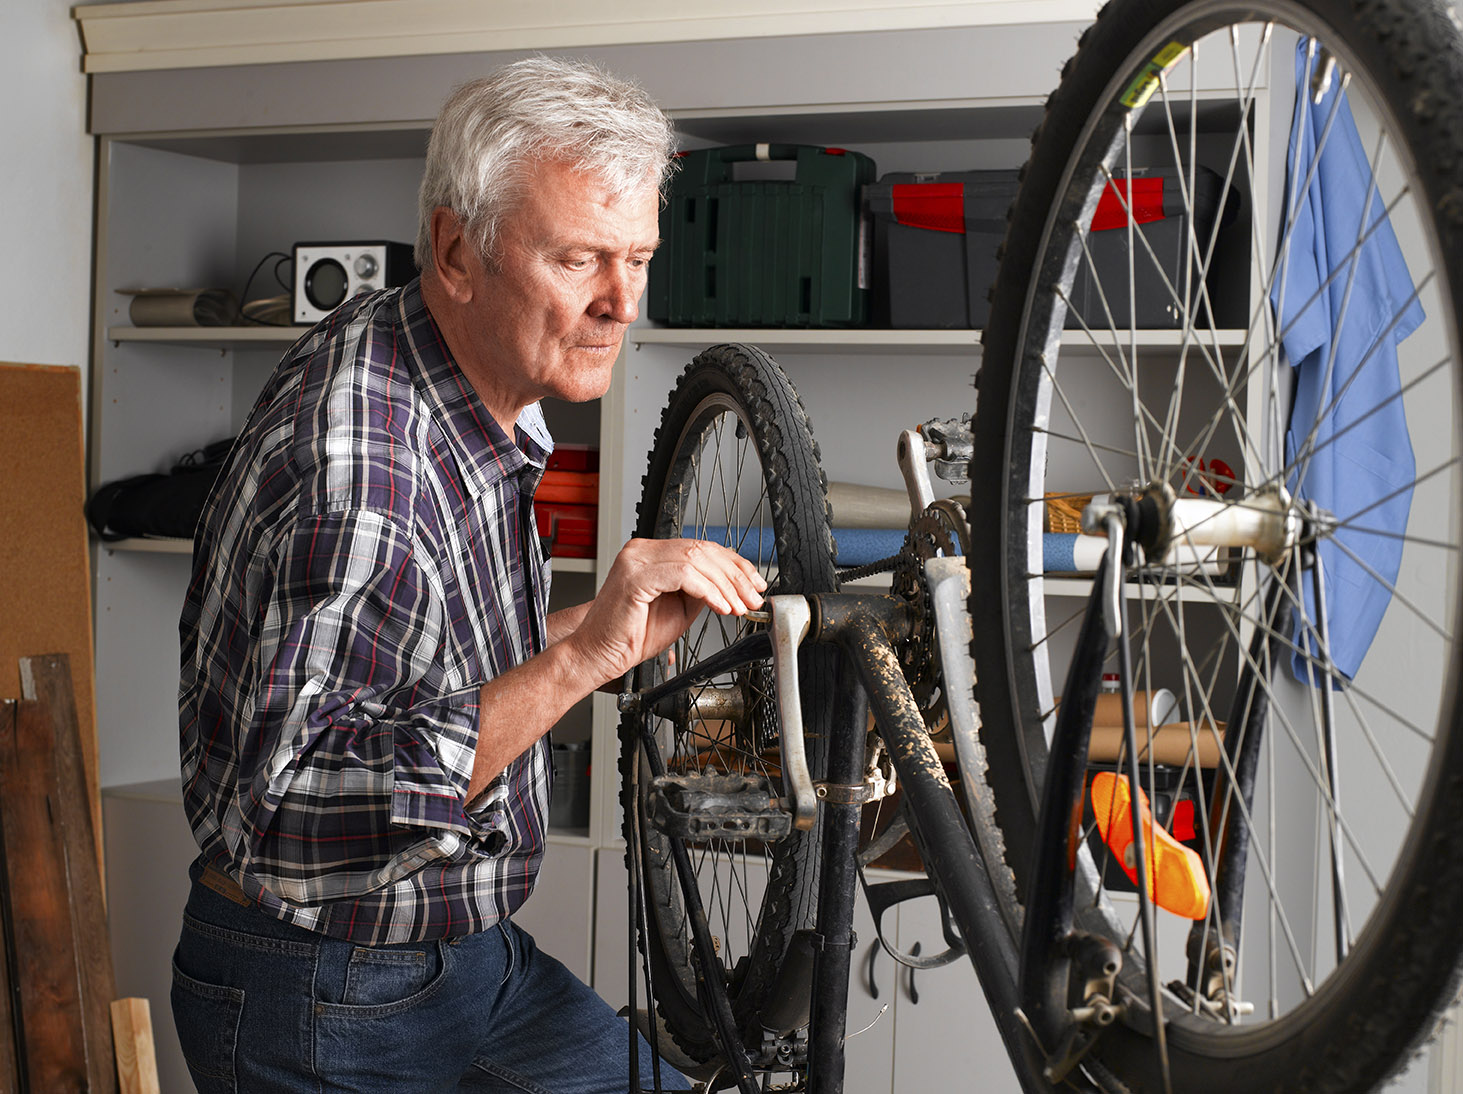 Silver-haired man fixing a bicycle